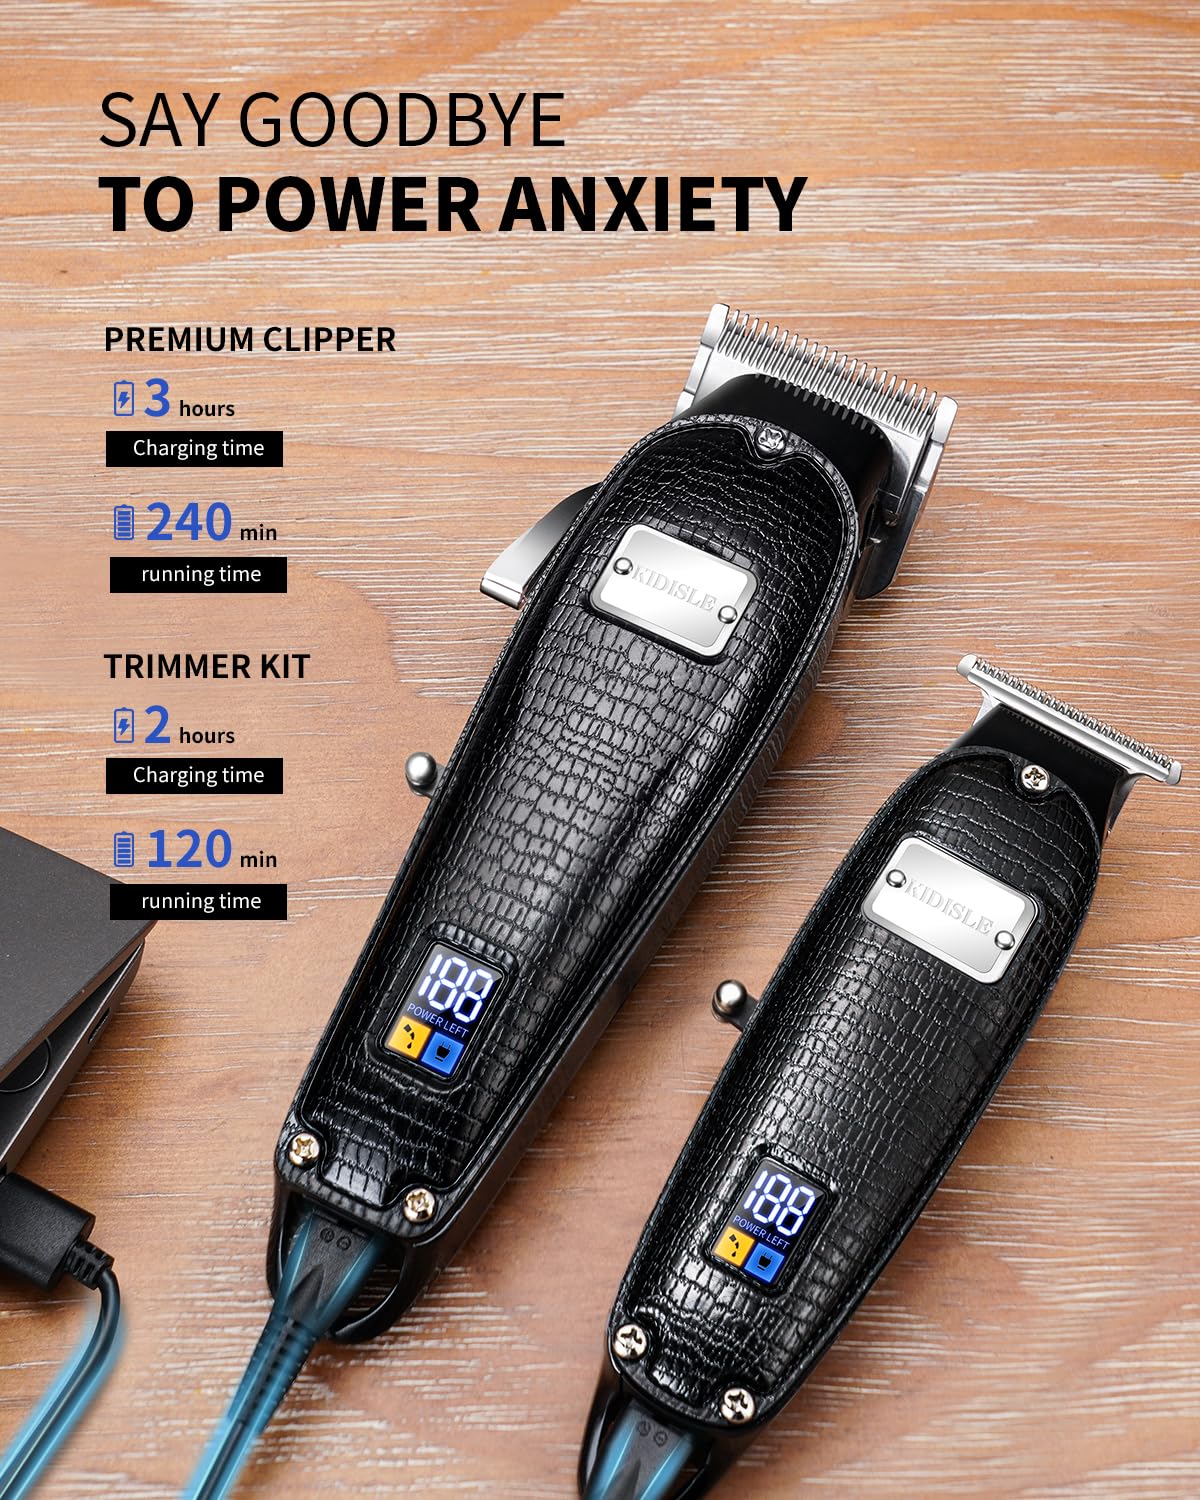 KIDISLE Hair Clippers for Men + T-Blade Barber Clippers, Precise Clippers for Hair Cutting, Cordless Hair Clippers, Led Display, Professional Hair Clippers, Fade Hair Trimmer with Travel Case